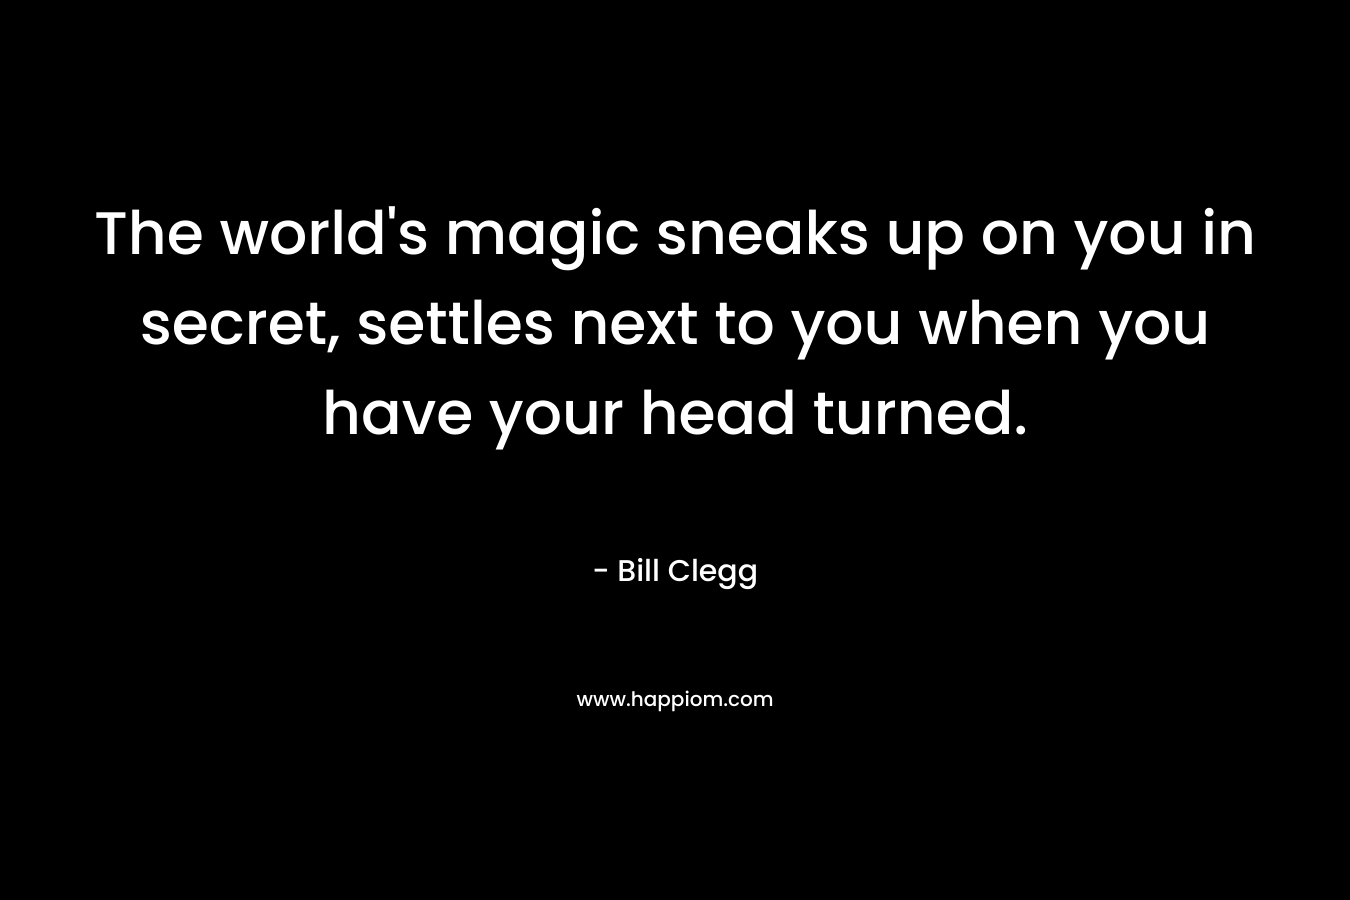 The world’s magic sneaks up on you in secret, settles next to you when you have your head turned. – Bill Clegg